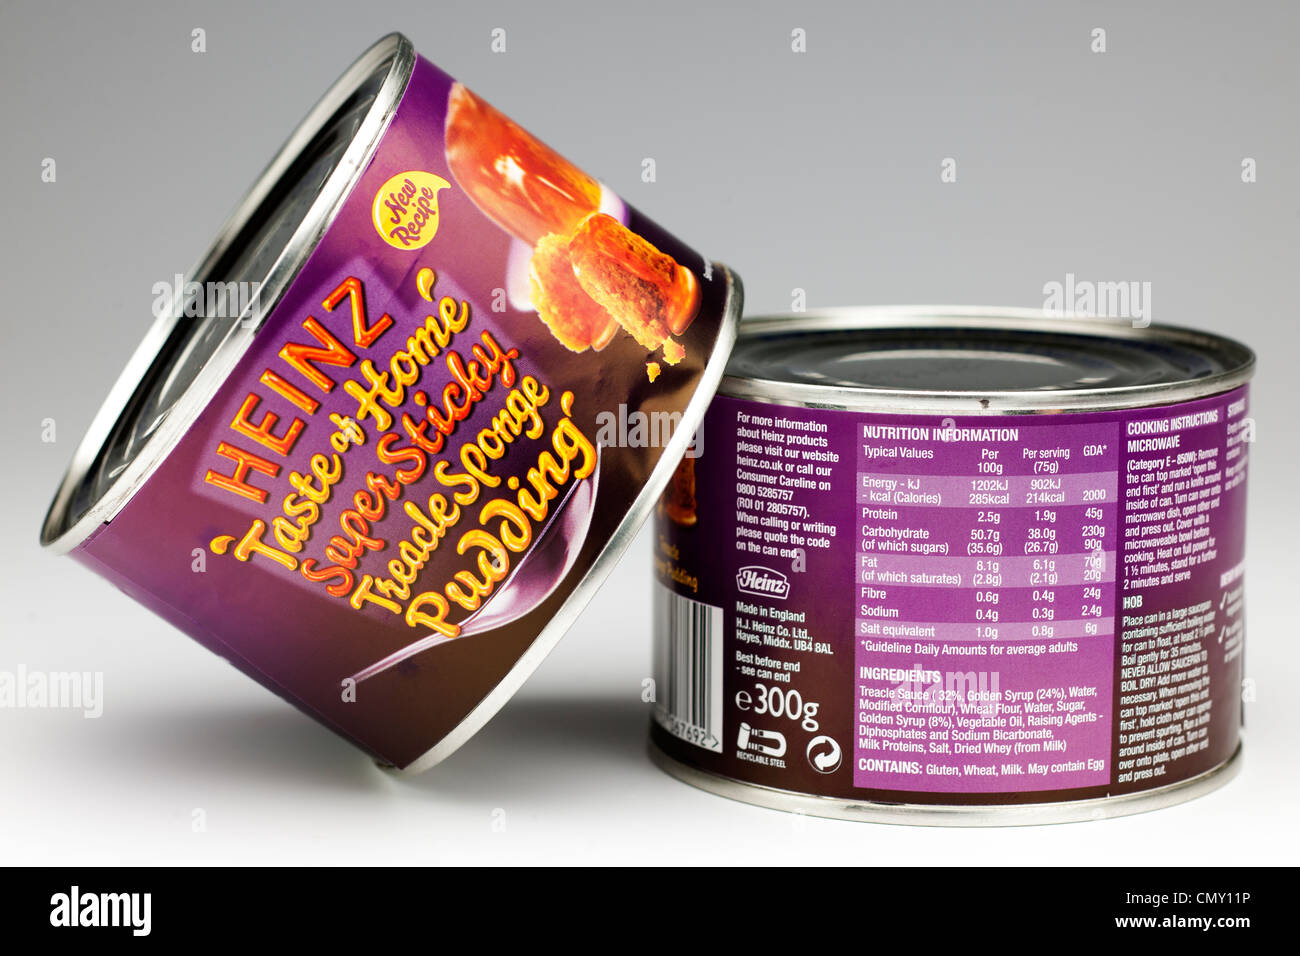 Two Tins of Heinz super sticky treacle sponge pudding Stock Photo